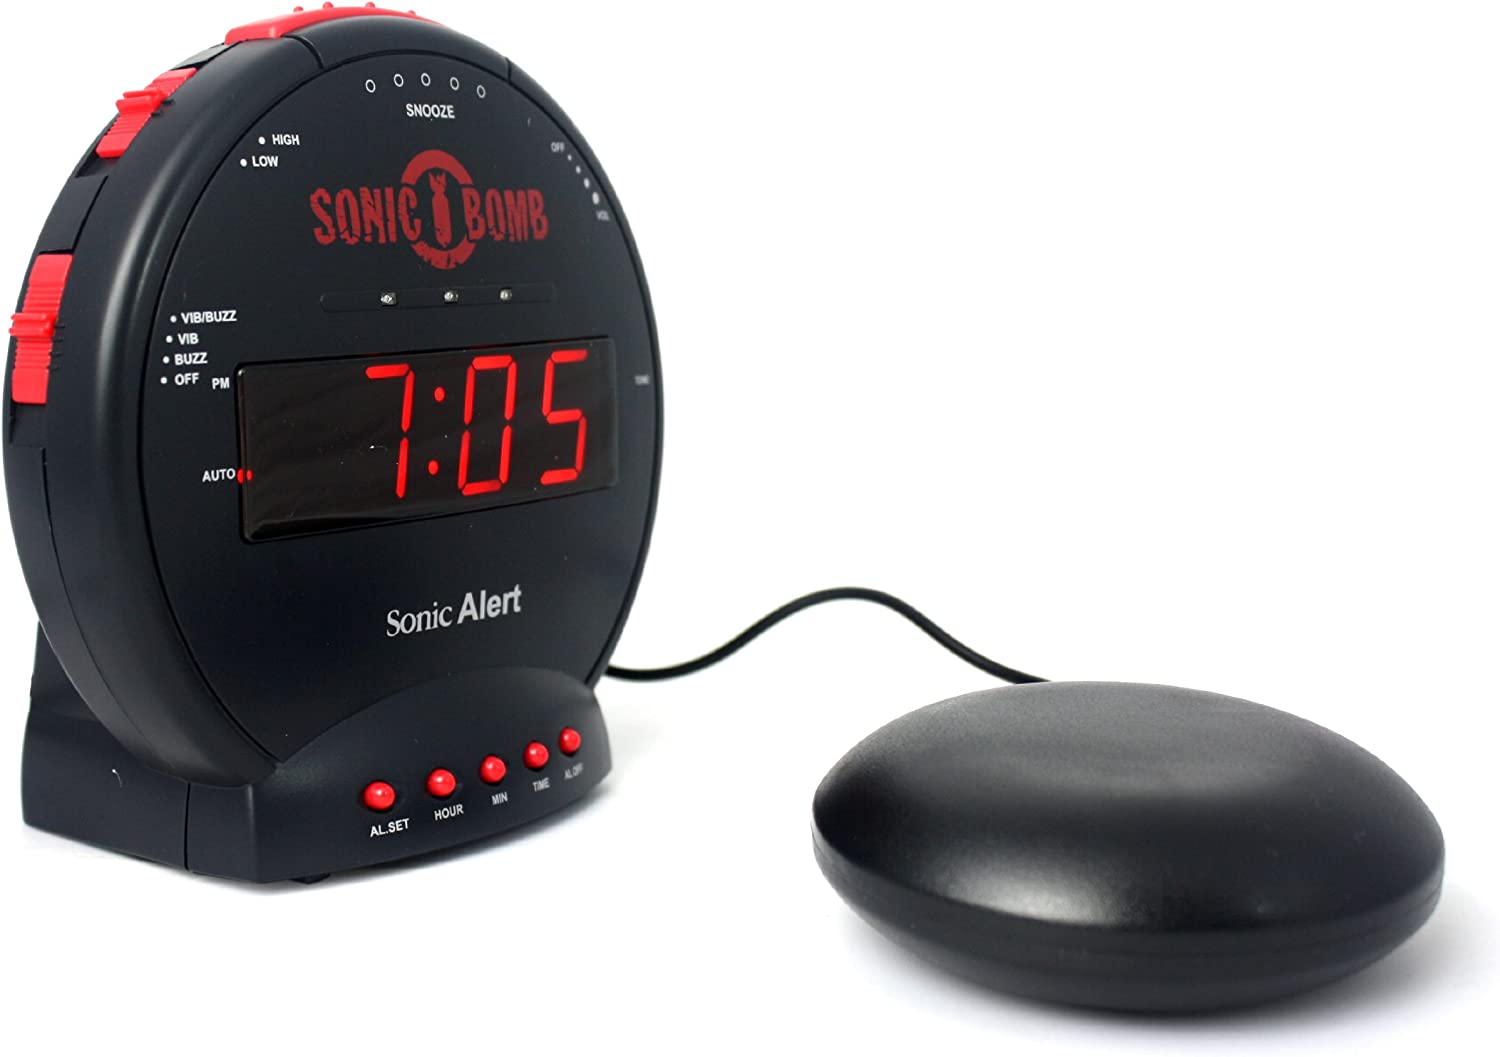 Sonic Alert - Sonic Bomb Dual Alarm Clock with Bed Shaker Vibrator and Digital Display - Black & Red - image 2 of 10